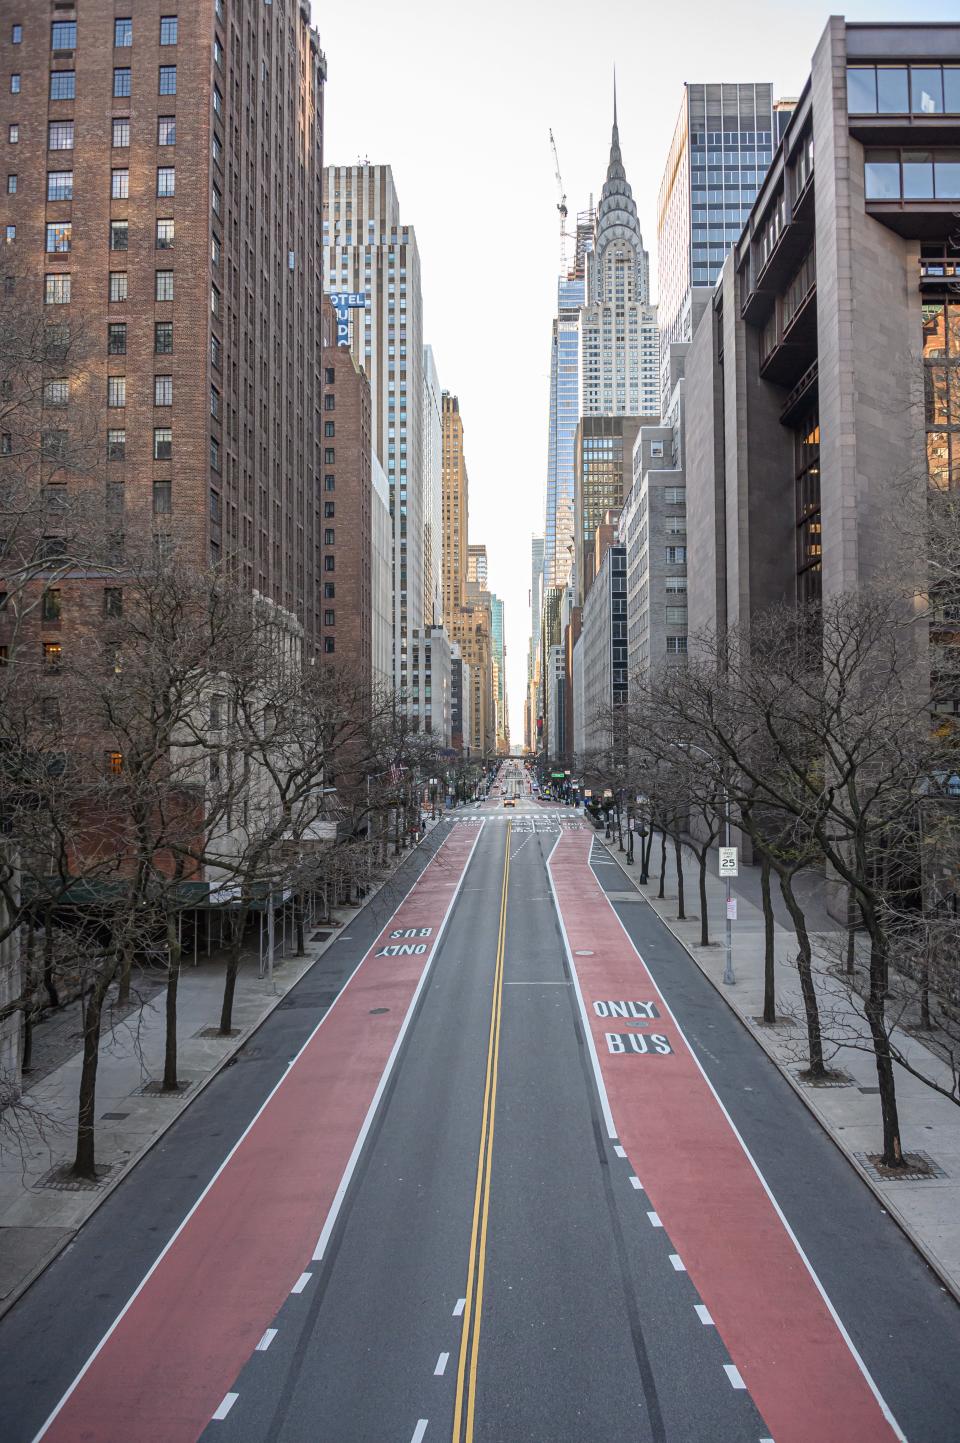 An April 6 view of New York City’s 42nd Street as seen from Tudor City Bridge.